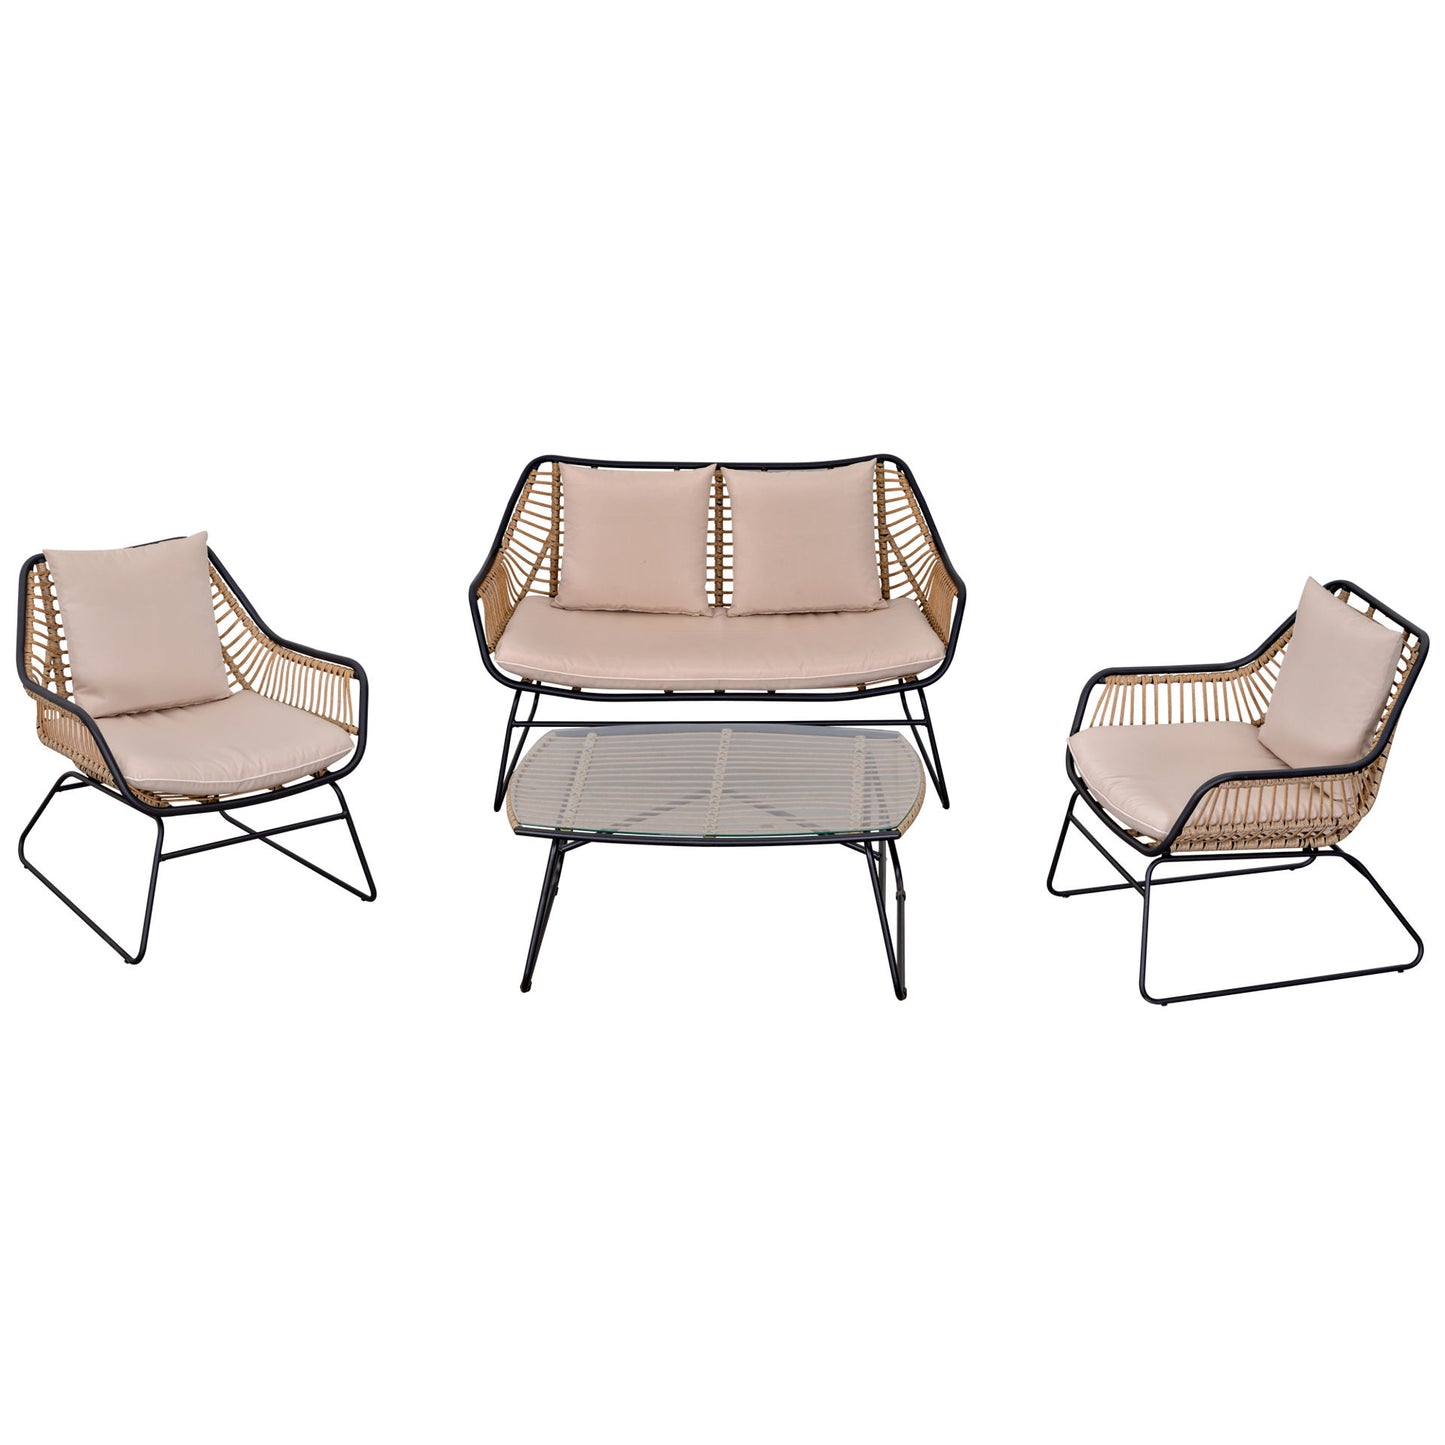 Nancy's Tern Rock 4-piece Lounge set - Rattan Sofa with tempered glass table, Sofa with table &amp; cushions